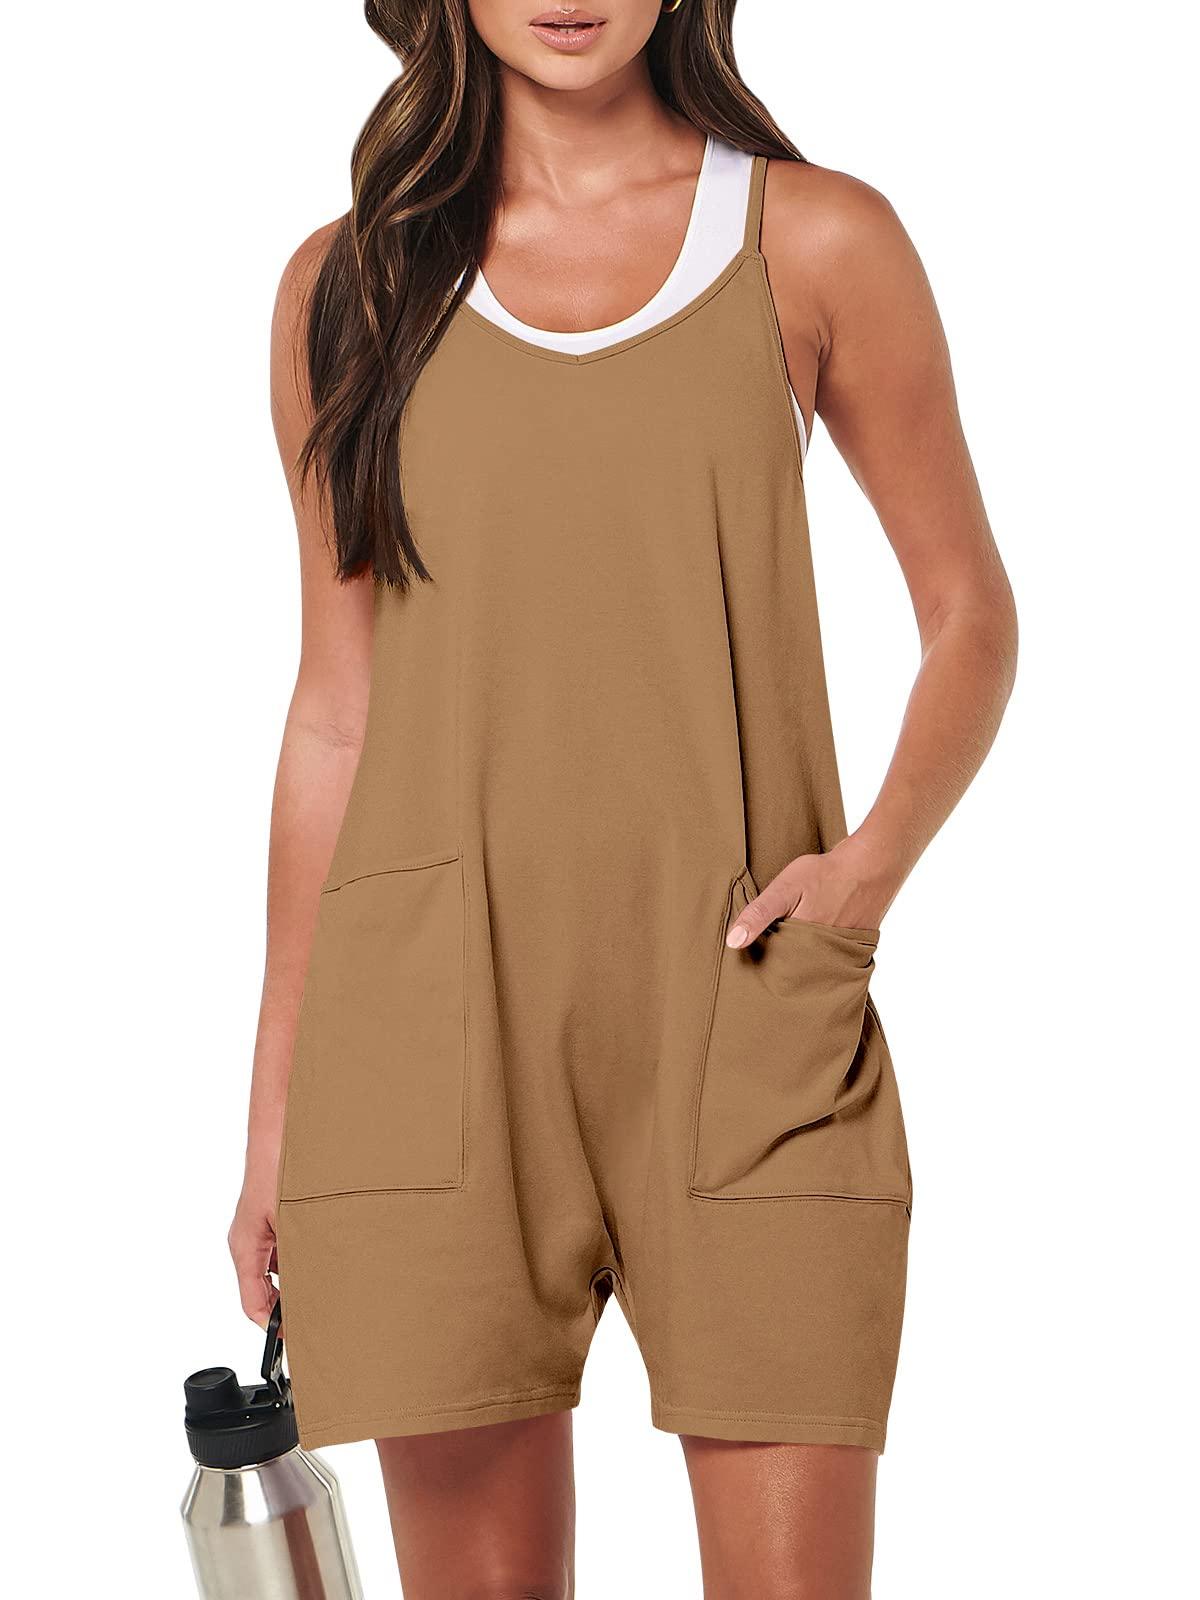 Women's Jumpsuits & Rompers Summer Rompers Solid & Patterned Designs